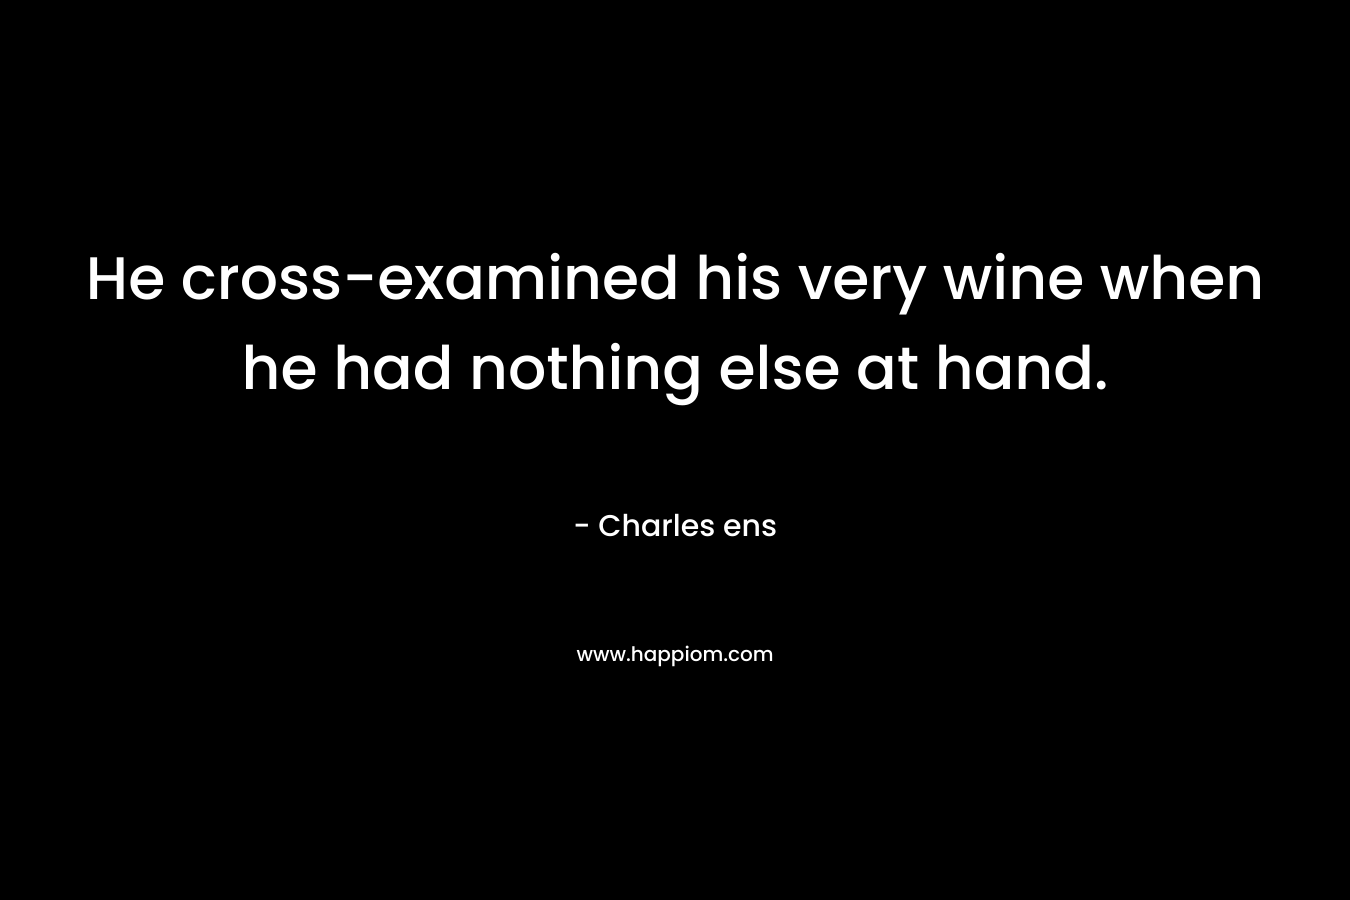 He cross-examined his very wine when he had nothing else at hand. – Charles ens